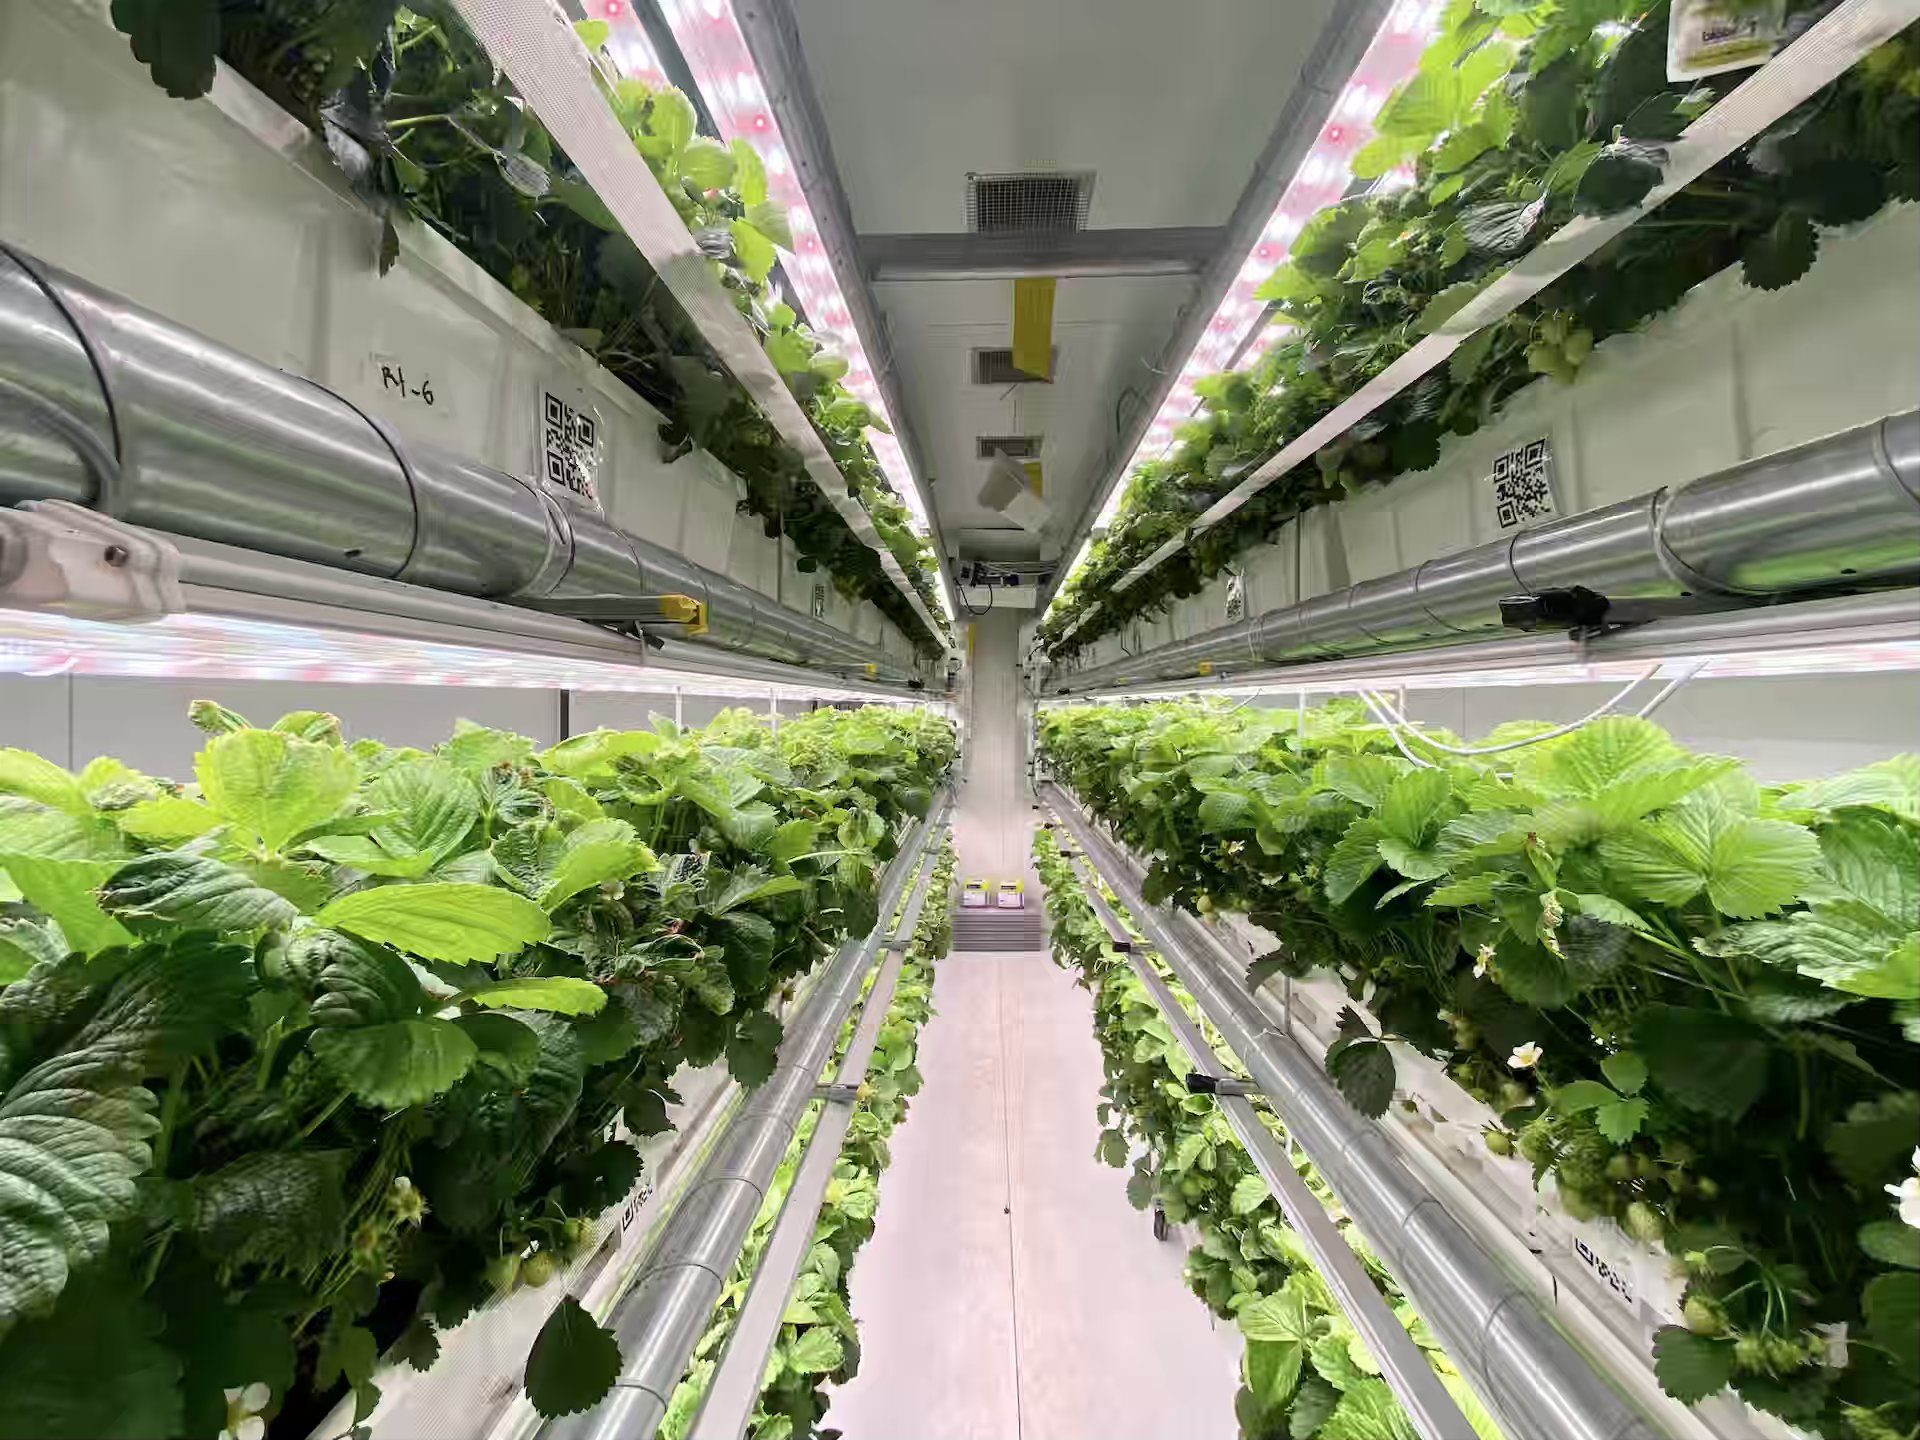 Vertical Farming Solutions For Strawberries - View in our container farm.